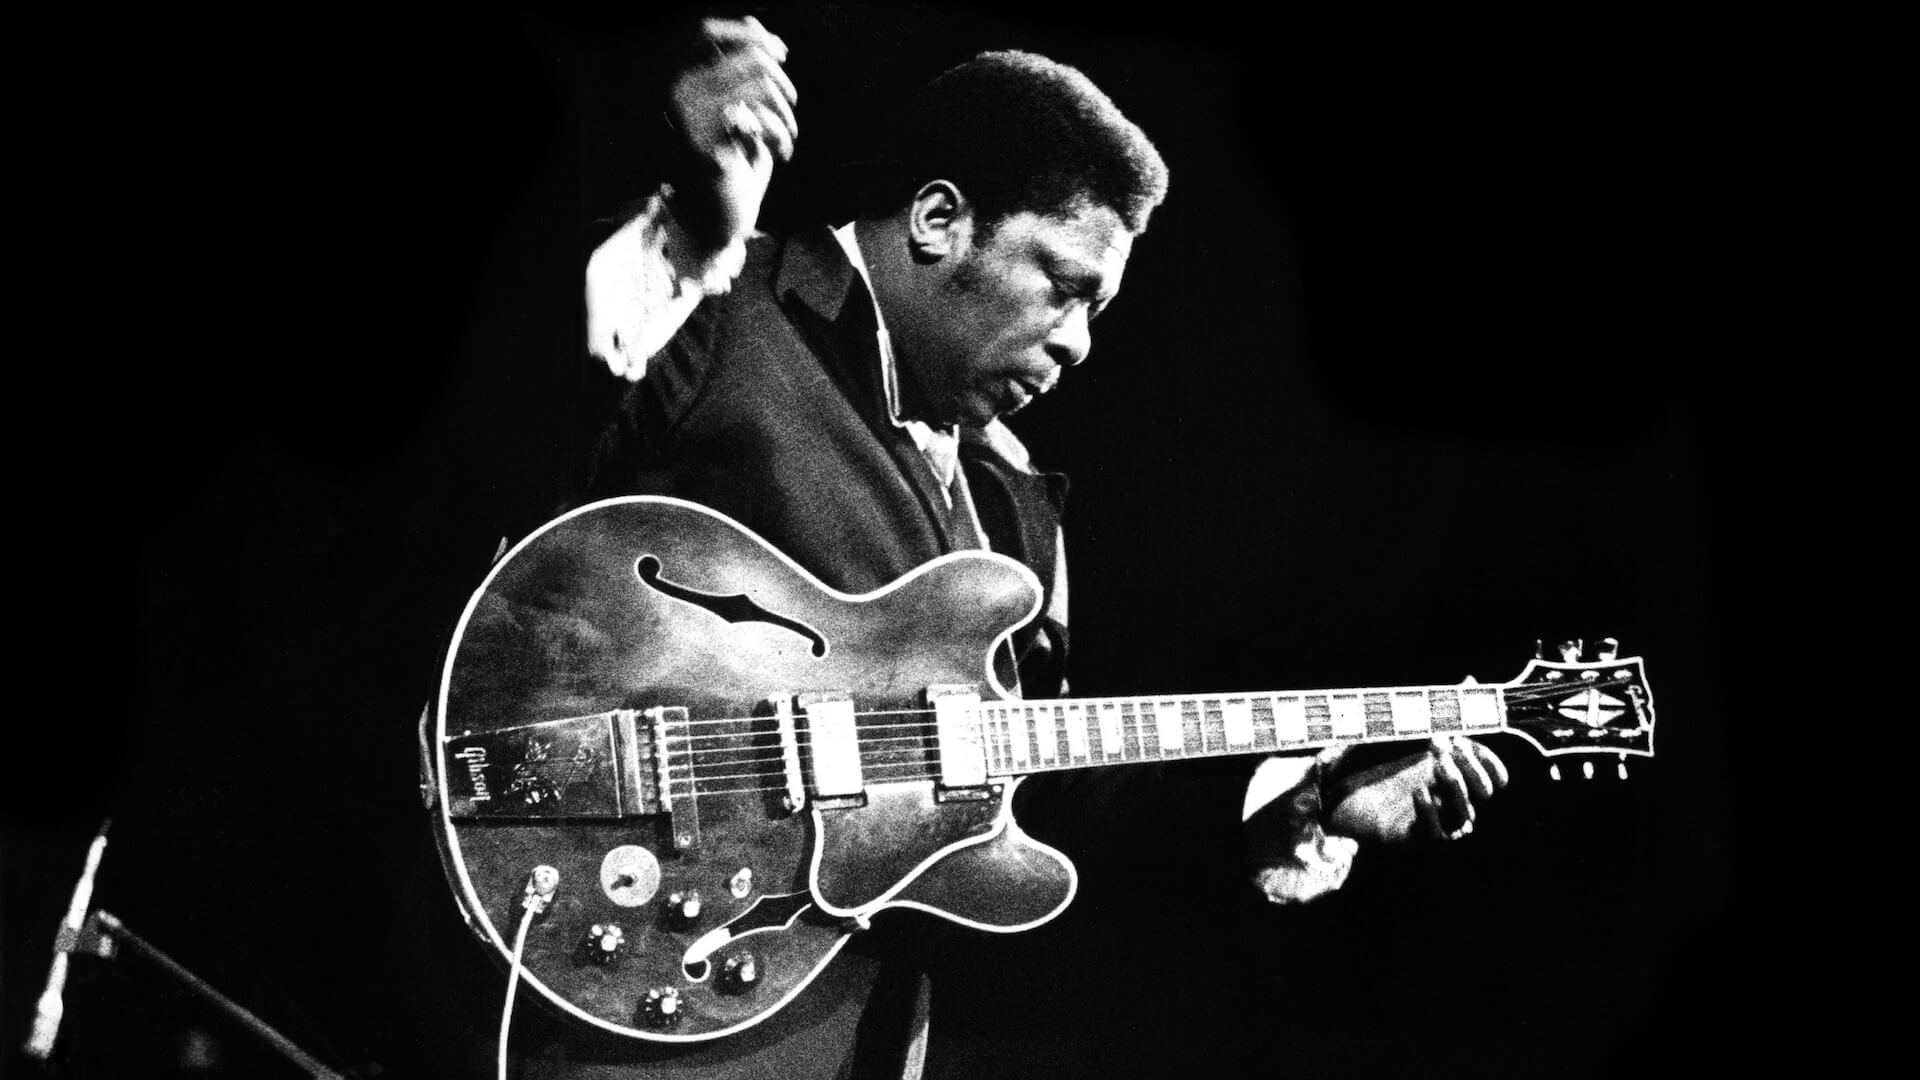 Tackle Today: What B.B. King has taught me about trading (B.B. King performs live at the Concertgebouw in Amsterdam, 1972 by Gijsbert Hanekroot-Redferns)